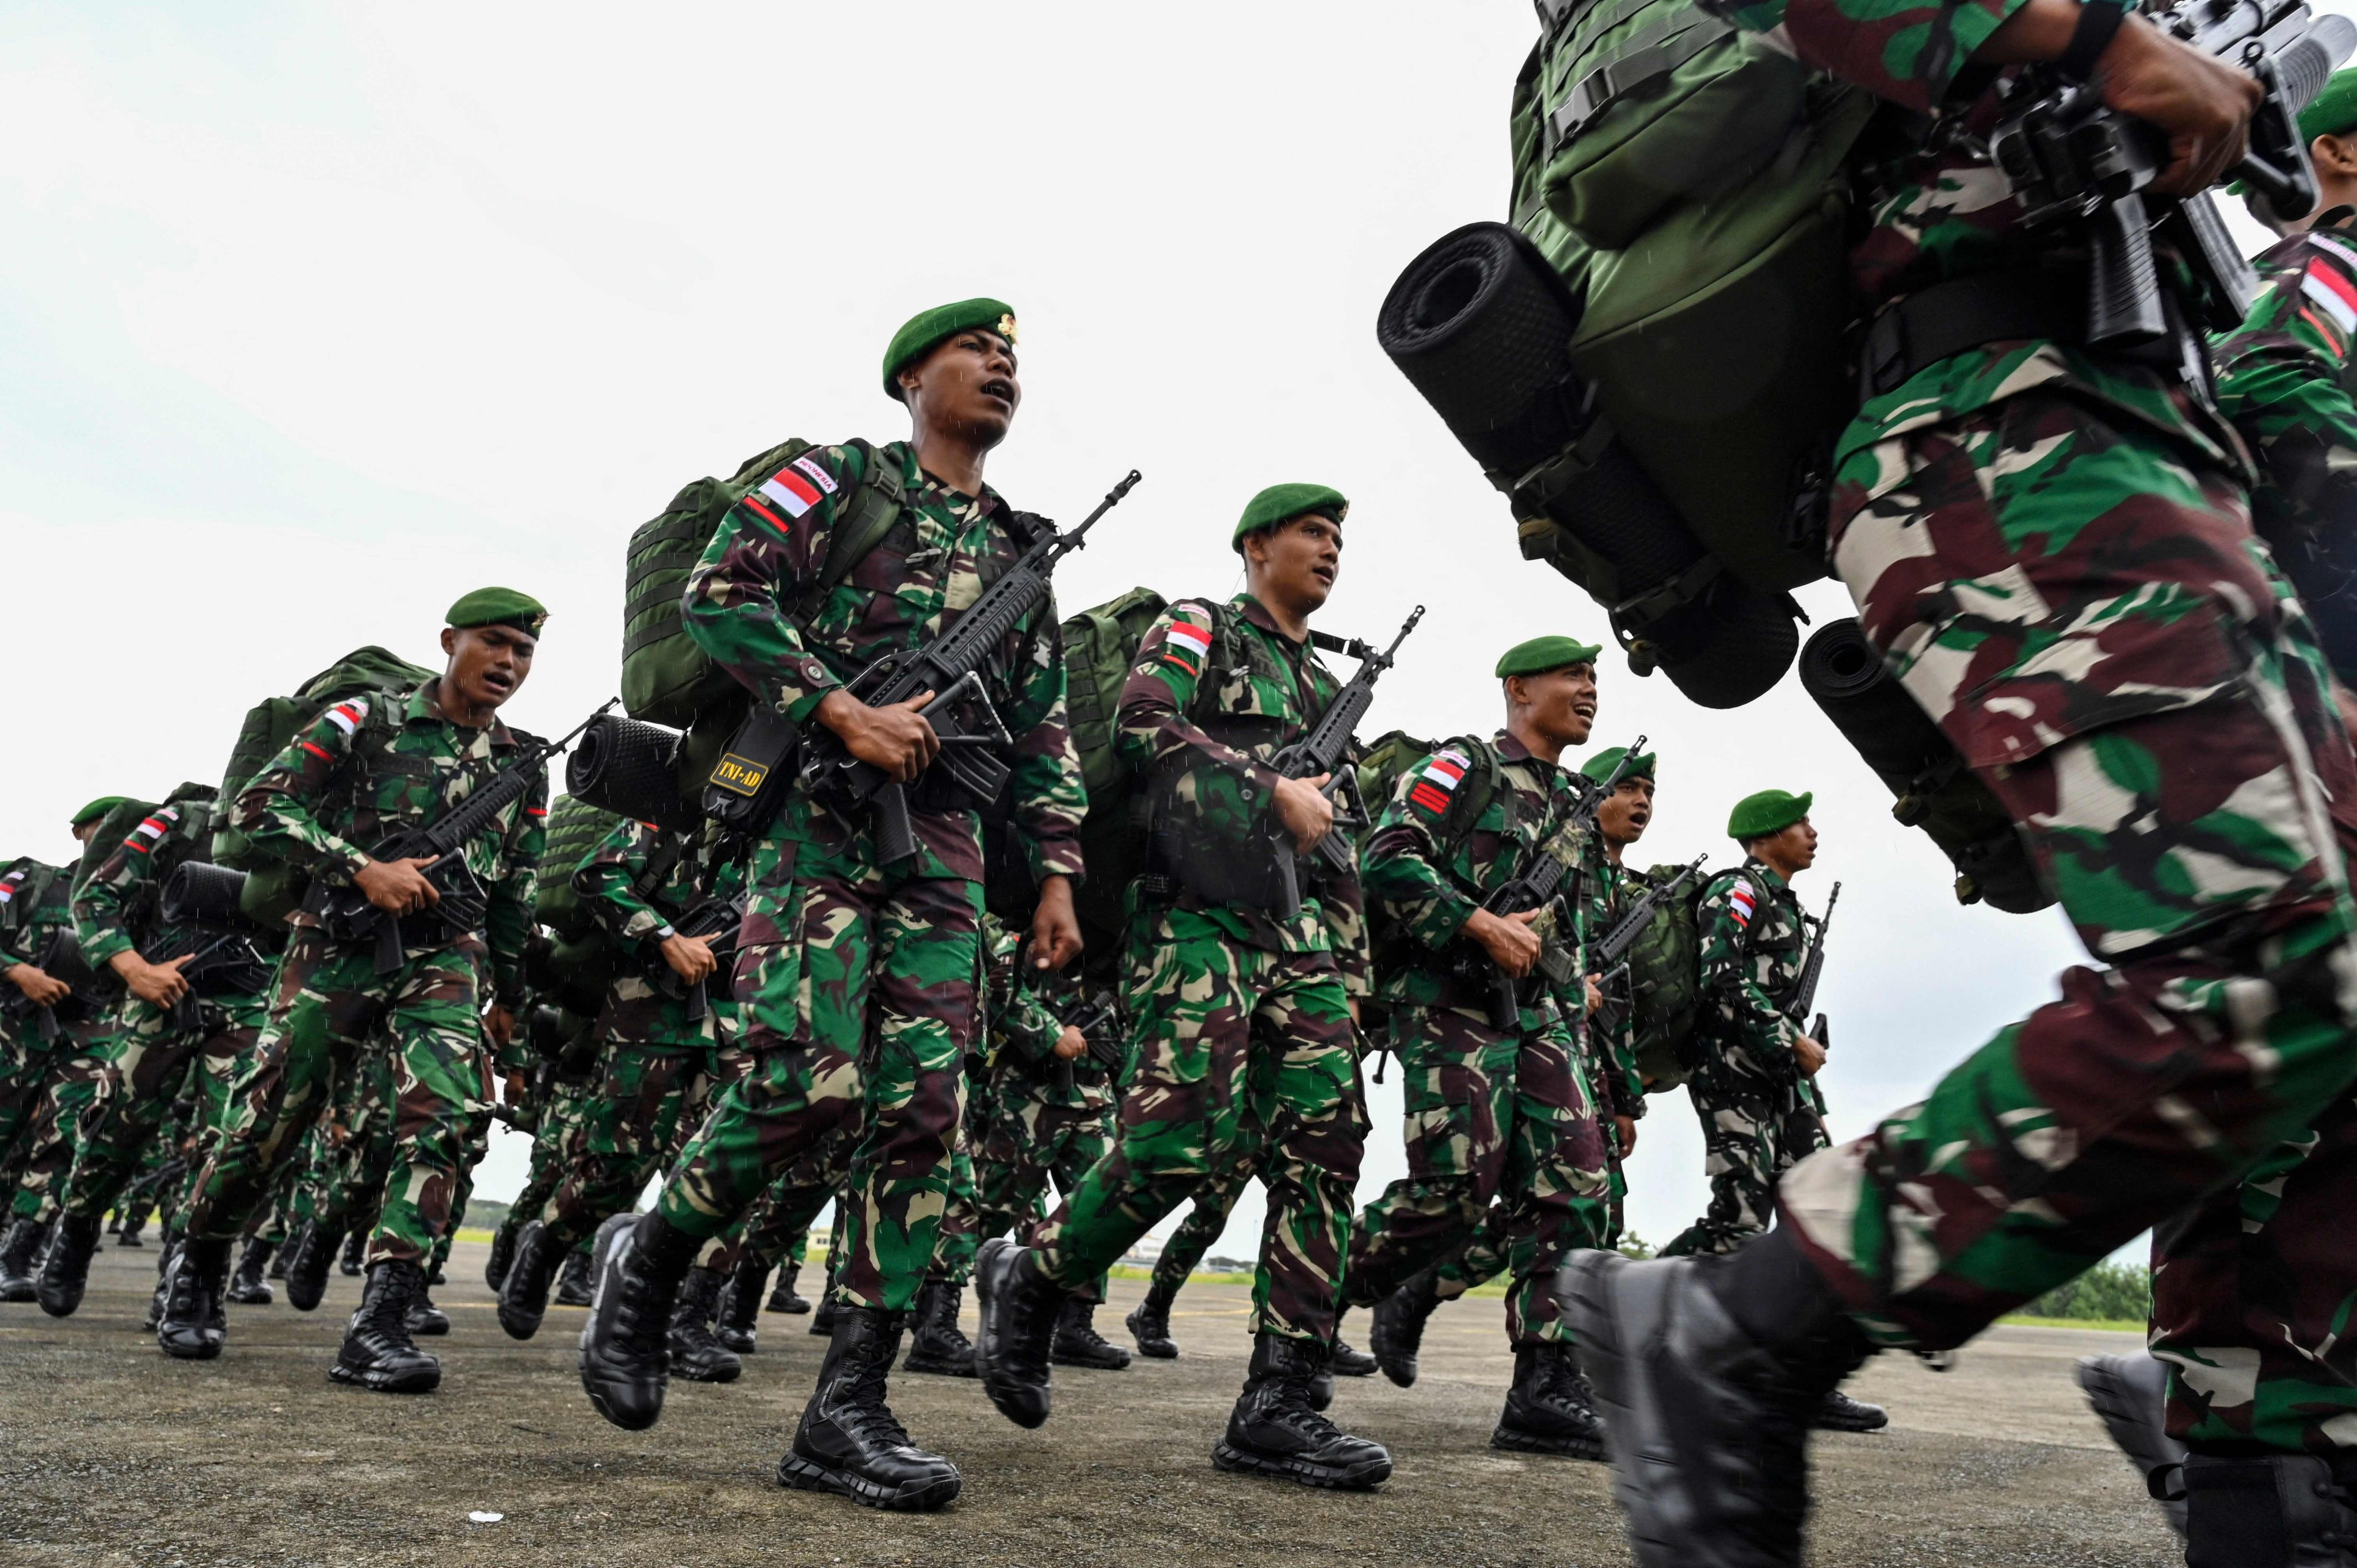 Indonesian soldiers are being asked to help plant rice as the country deals with drought conditions that have affected output of the grain. Photo: AFP